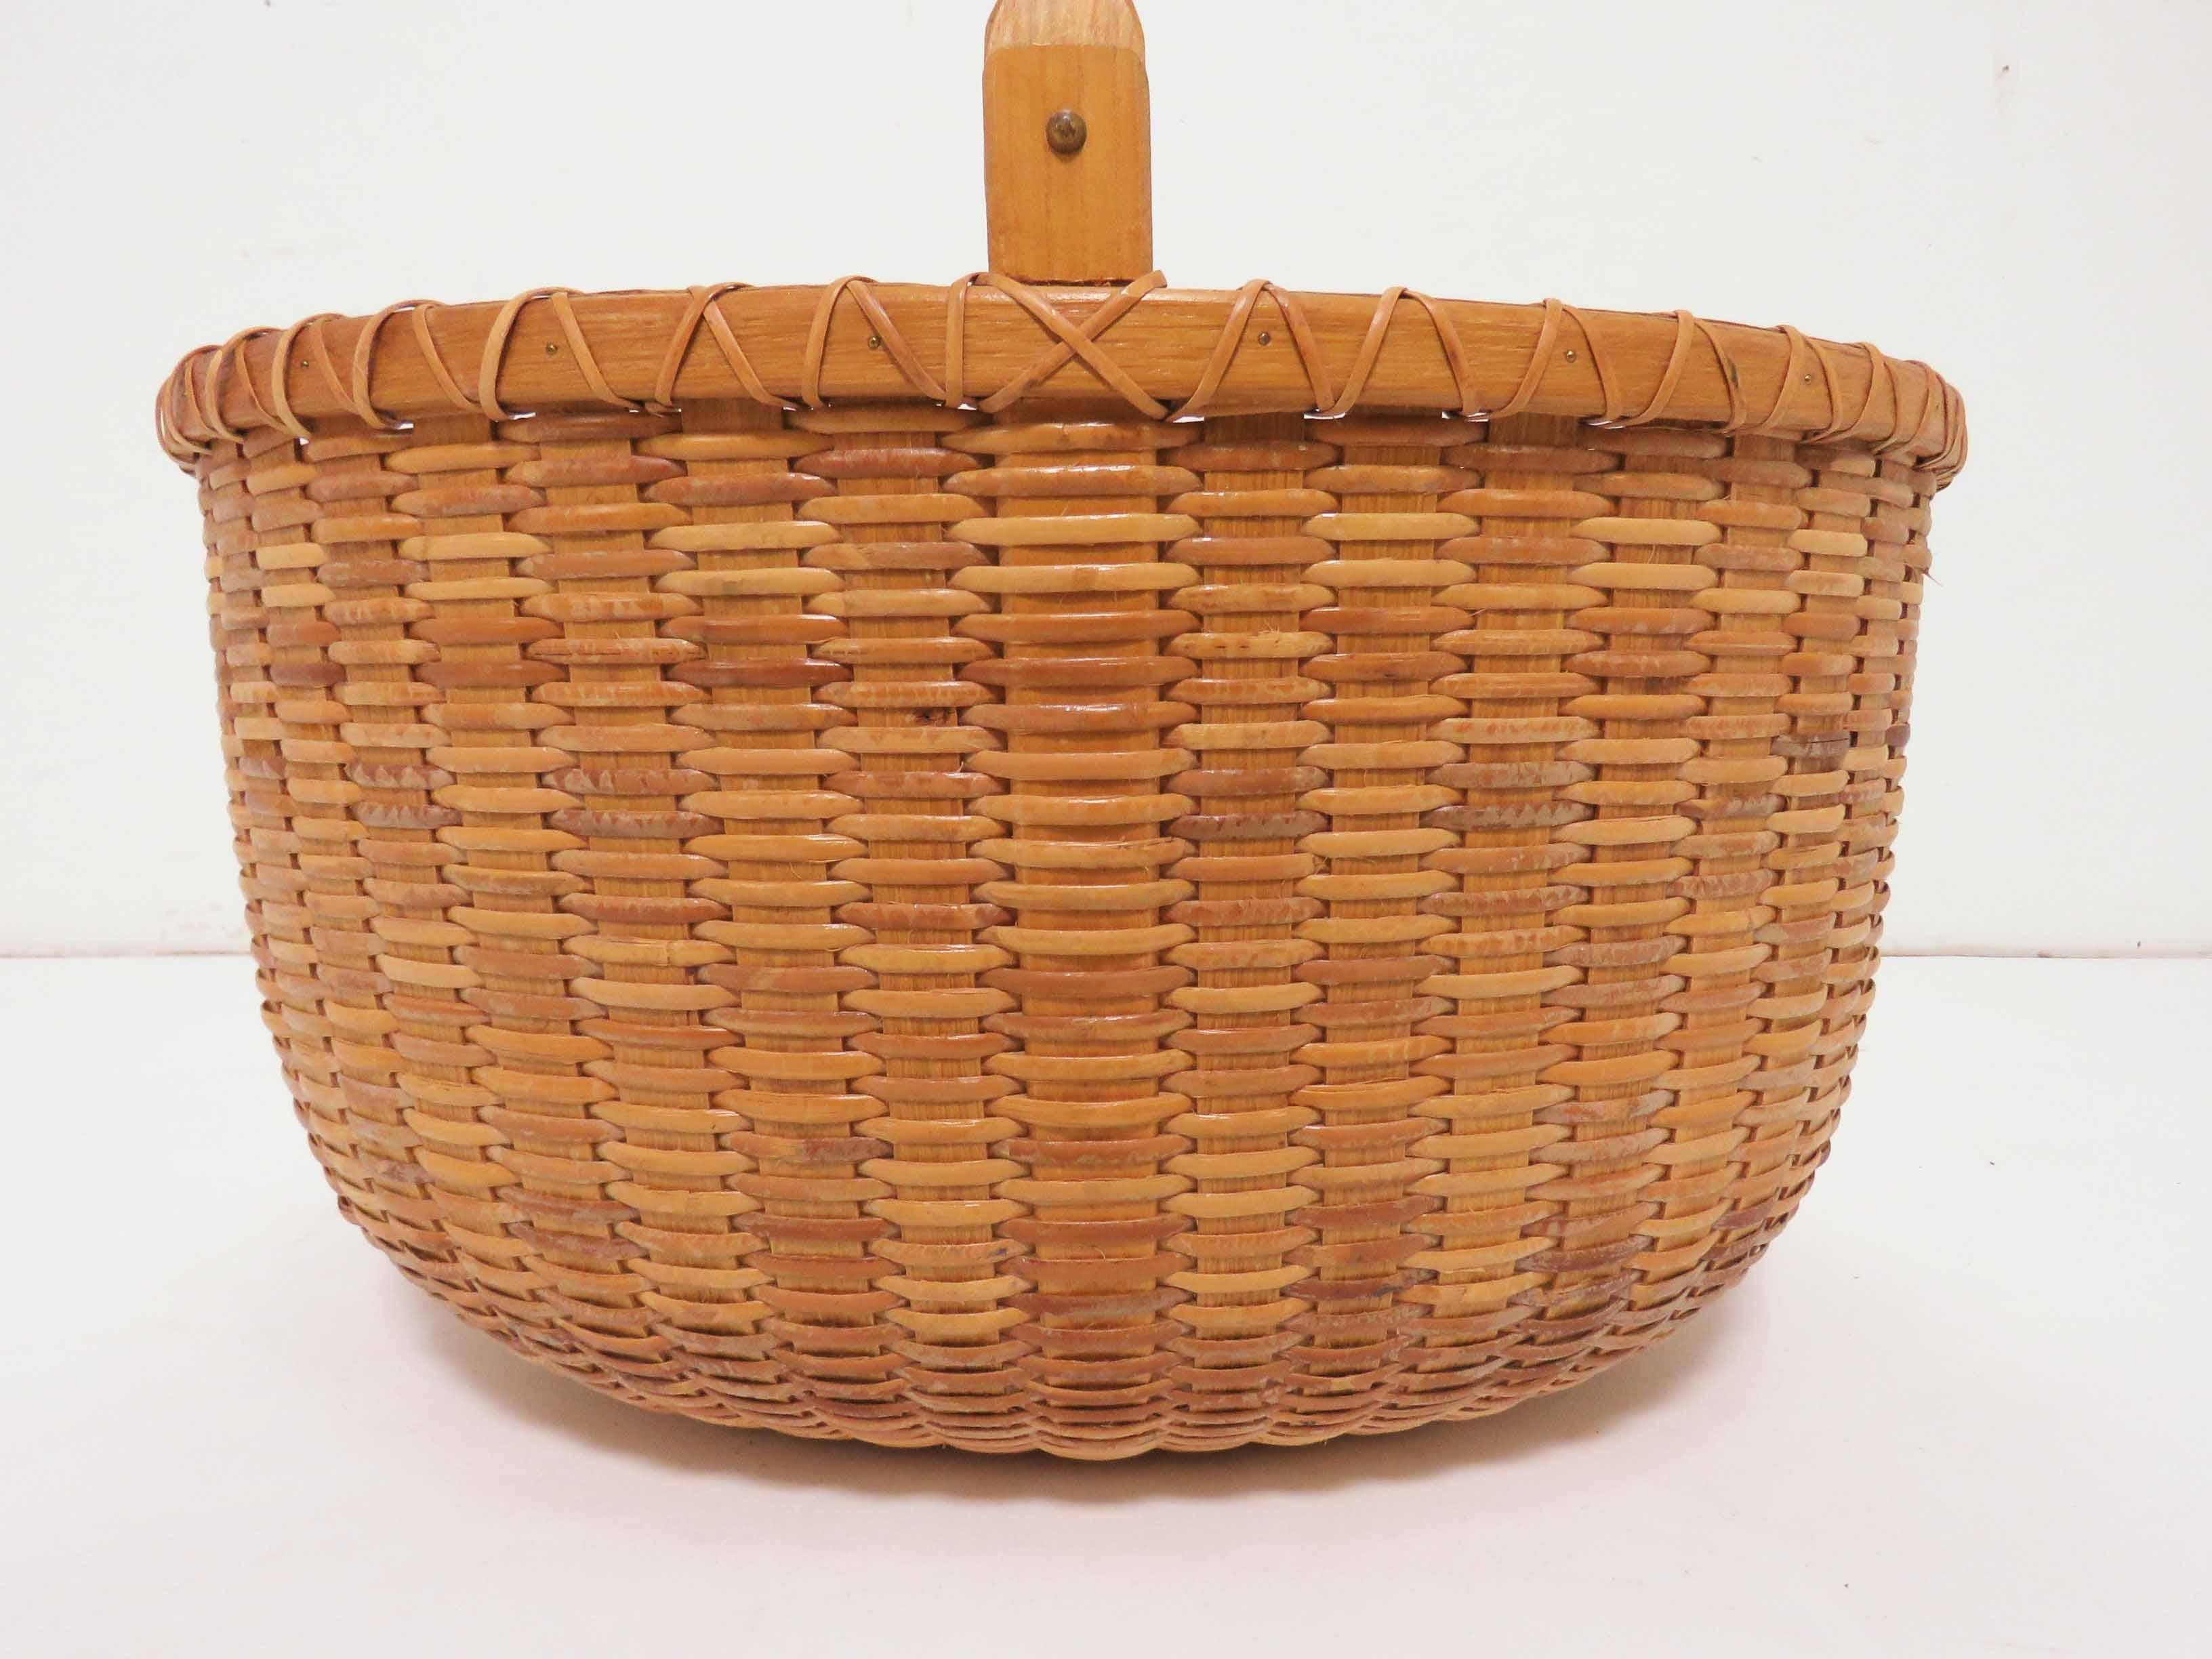 Late 20th Century Monumental Nantucket Lightship Basket by Arthur R. Martin Dated 1992